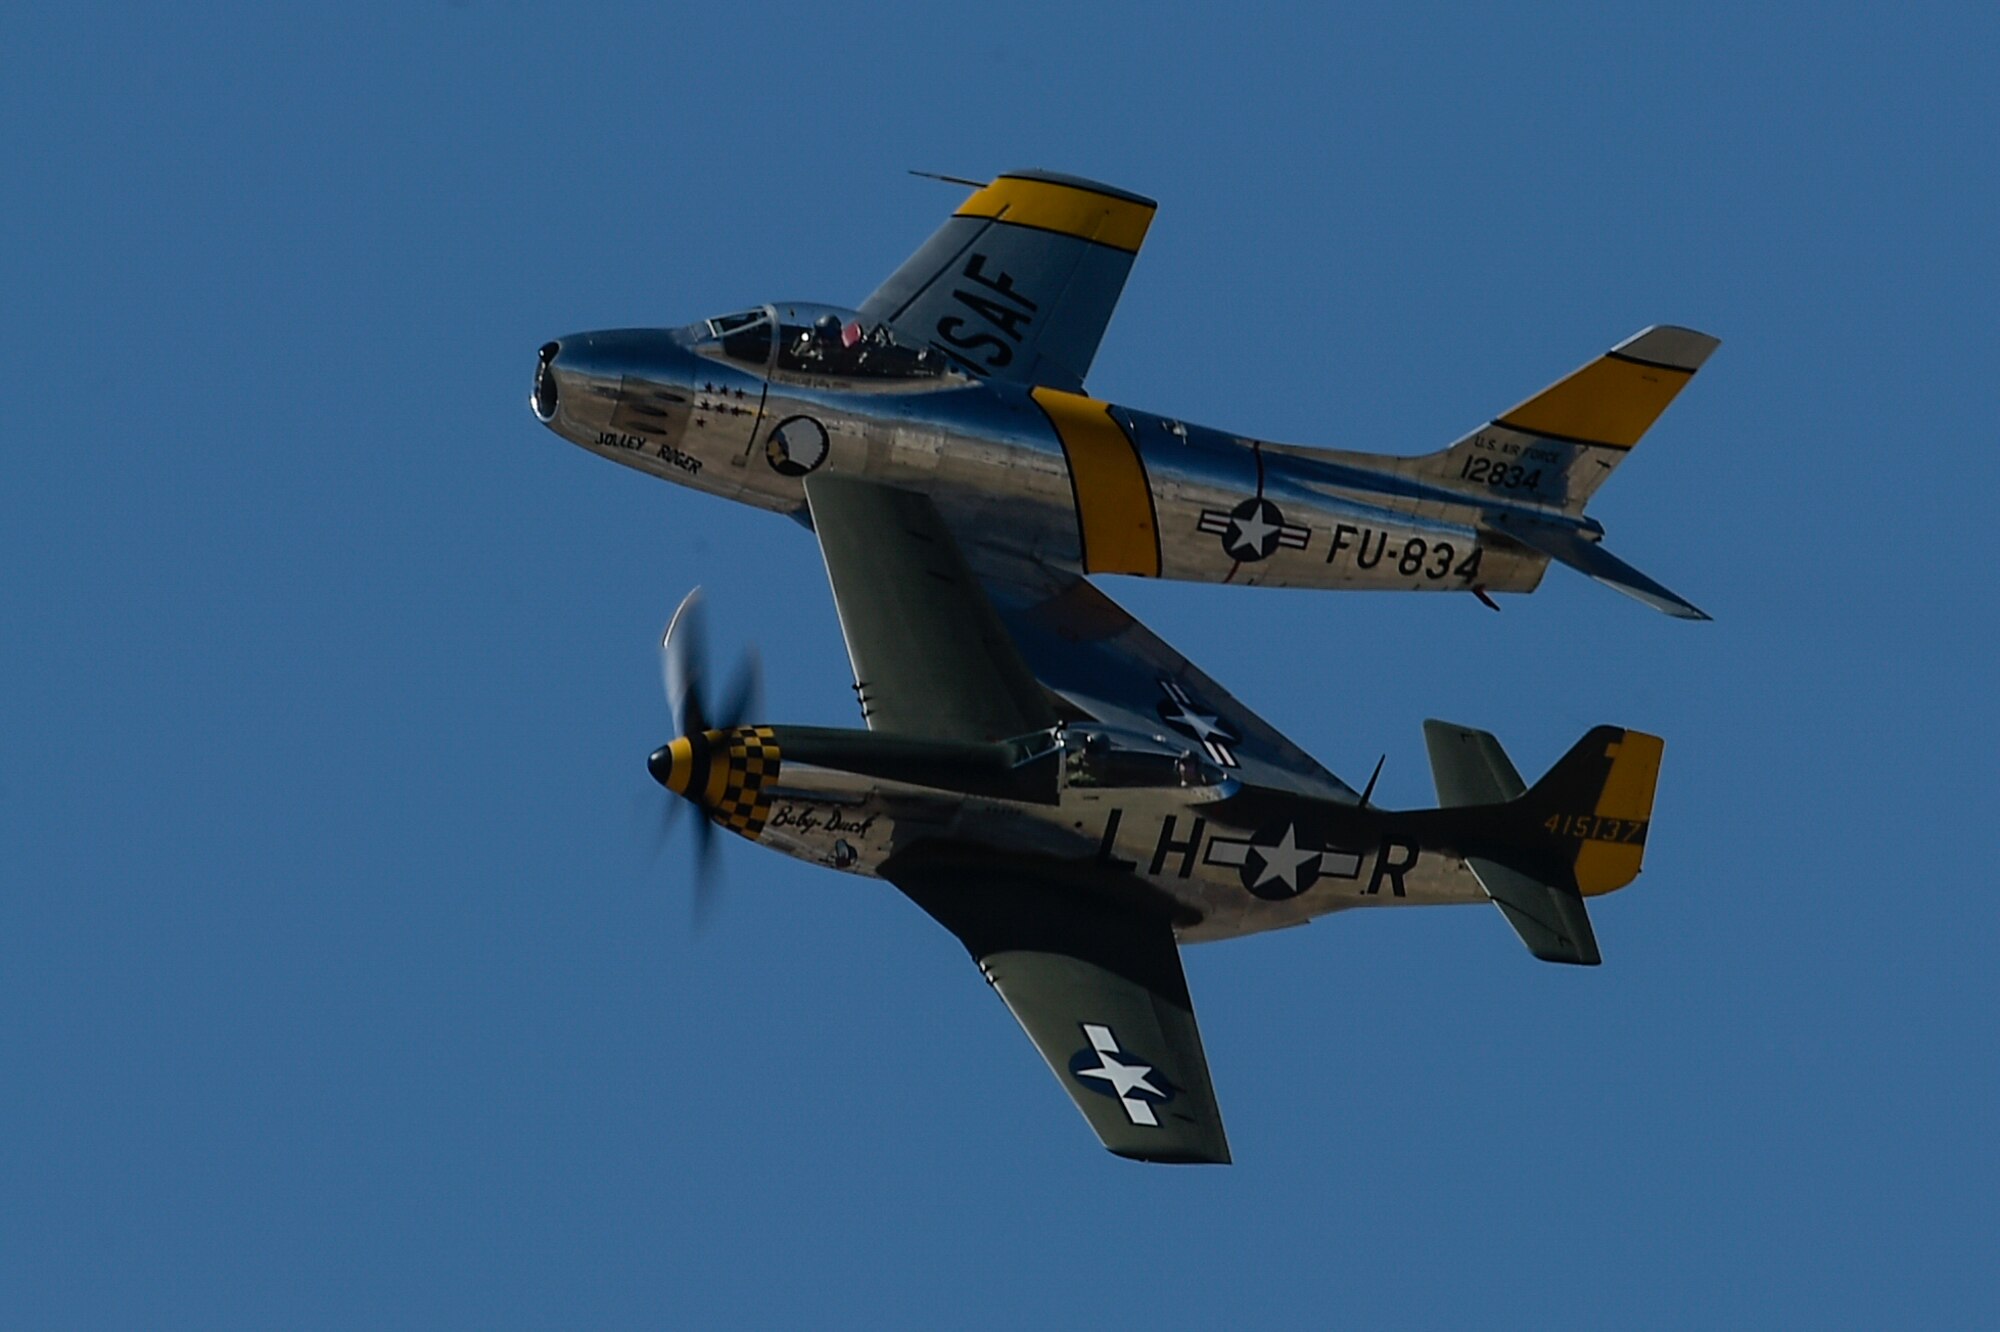 A P-51 Mustang and an F-86 Sabre fly together during the 2017 Heritage Flight Training and Certification Course at Davis-Monthan Air Force Base, Ariz., Feb. 10, 2017. During the course, aircrews practice ground and flight training to enable civilian pilots of historic military aircraft and U.S. Air Force pilots of current fighter aircraft to fly safely in formations together. (U.S. Air Force photo by Senior Airman Chris Drzazgowski)